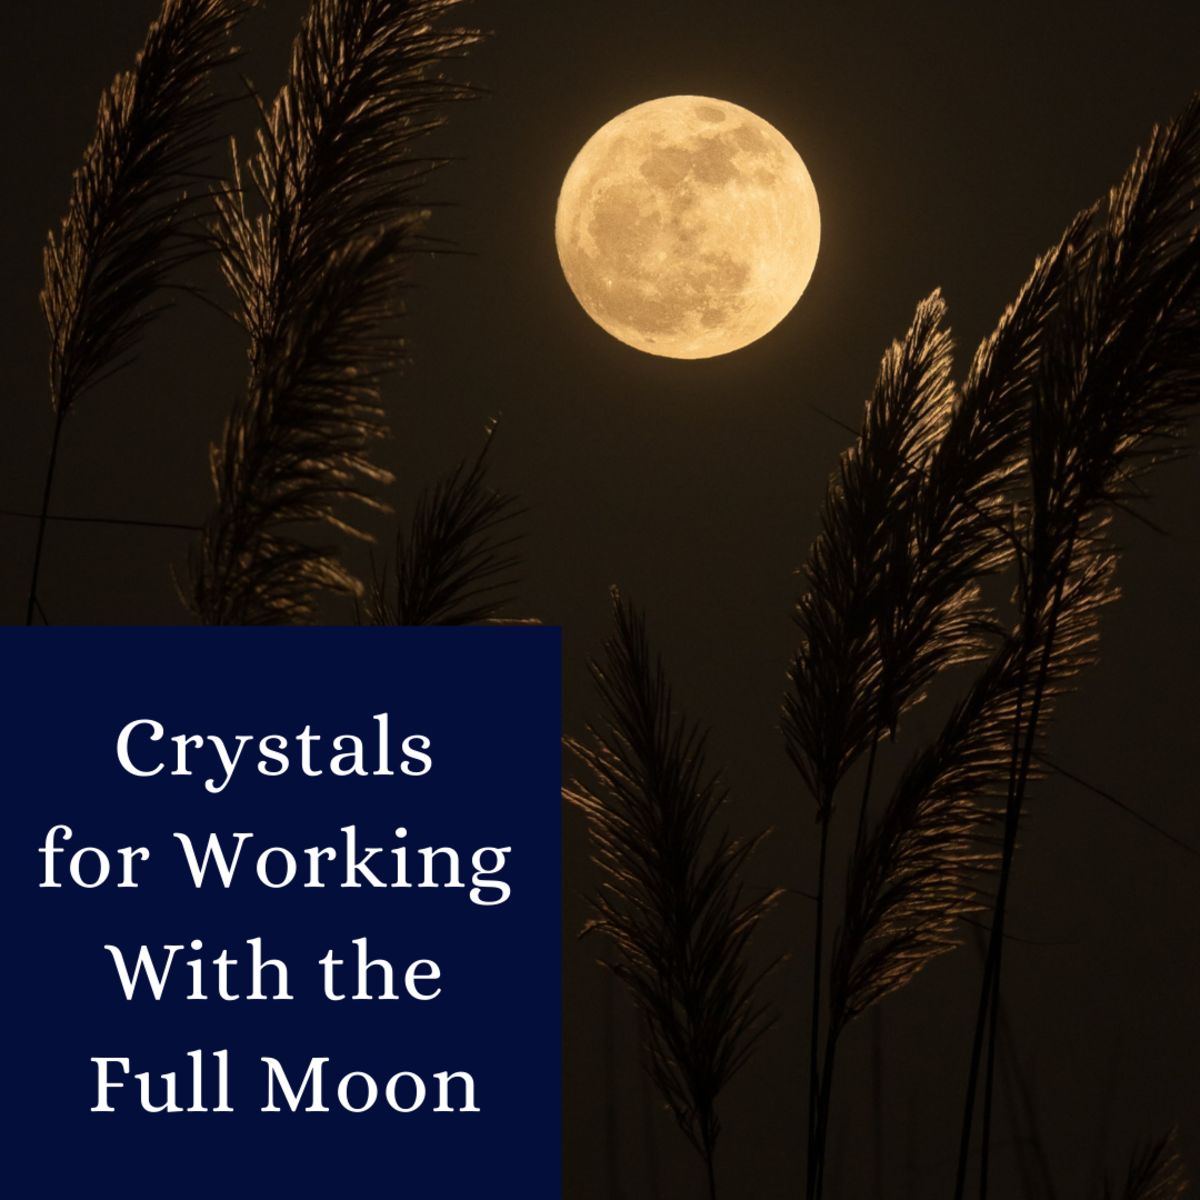 7 Crystals for Working With Full Moon Energy